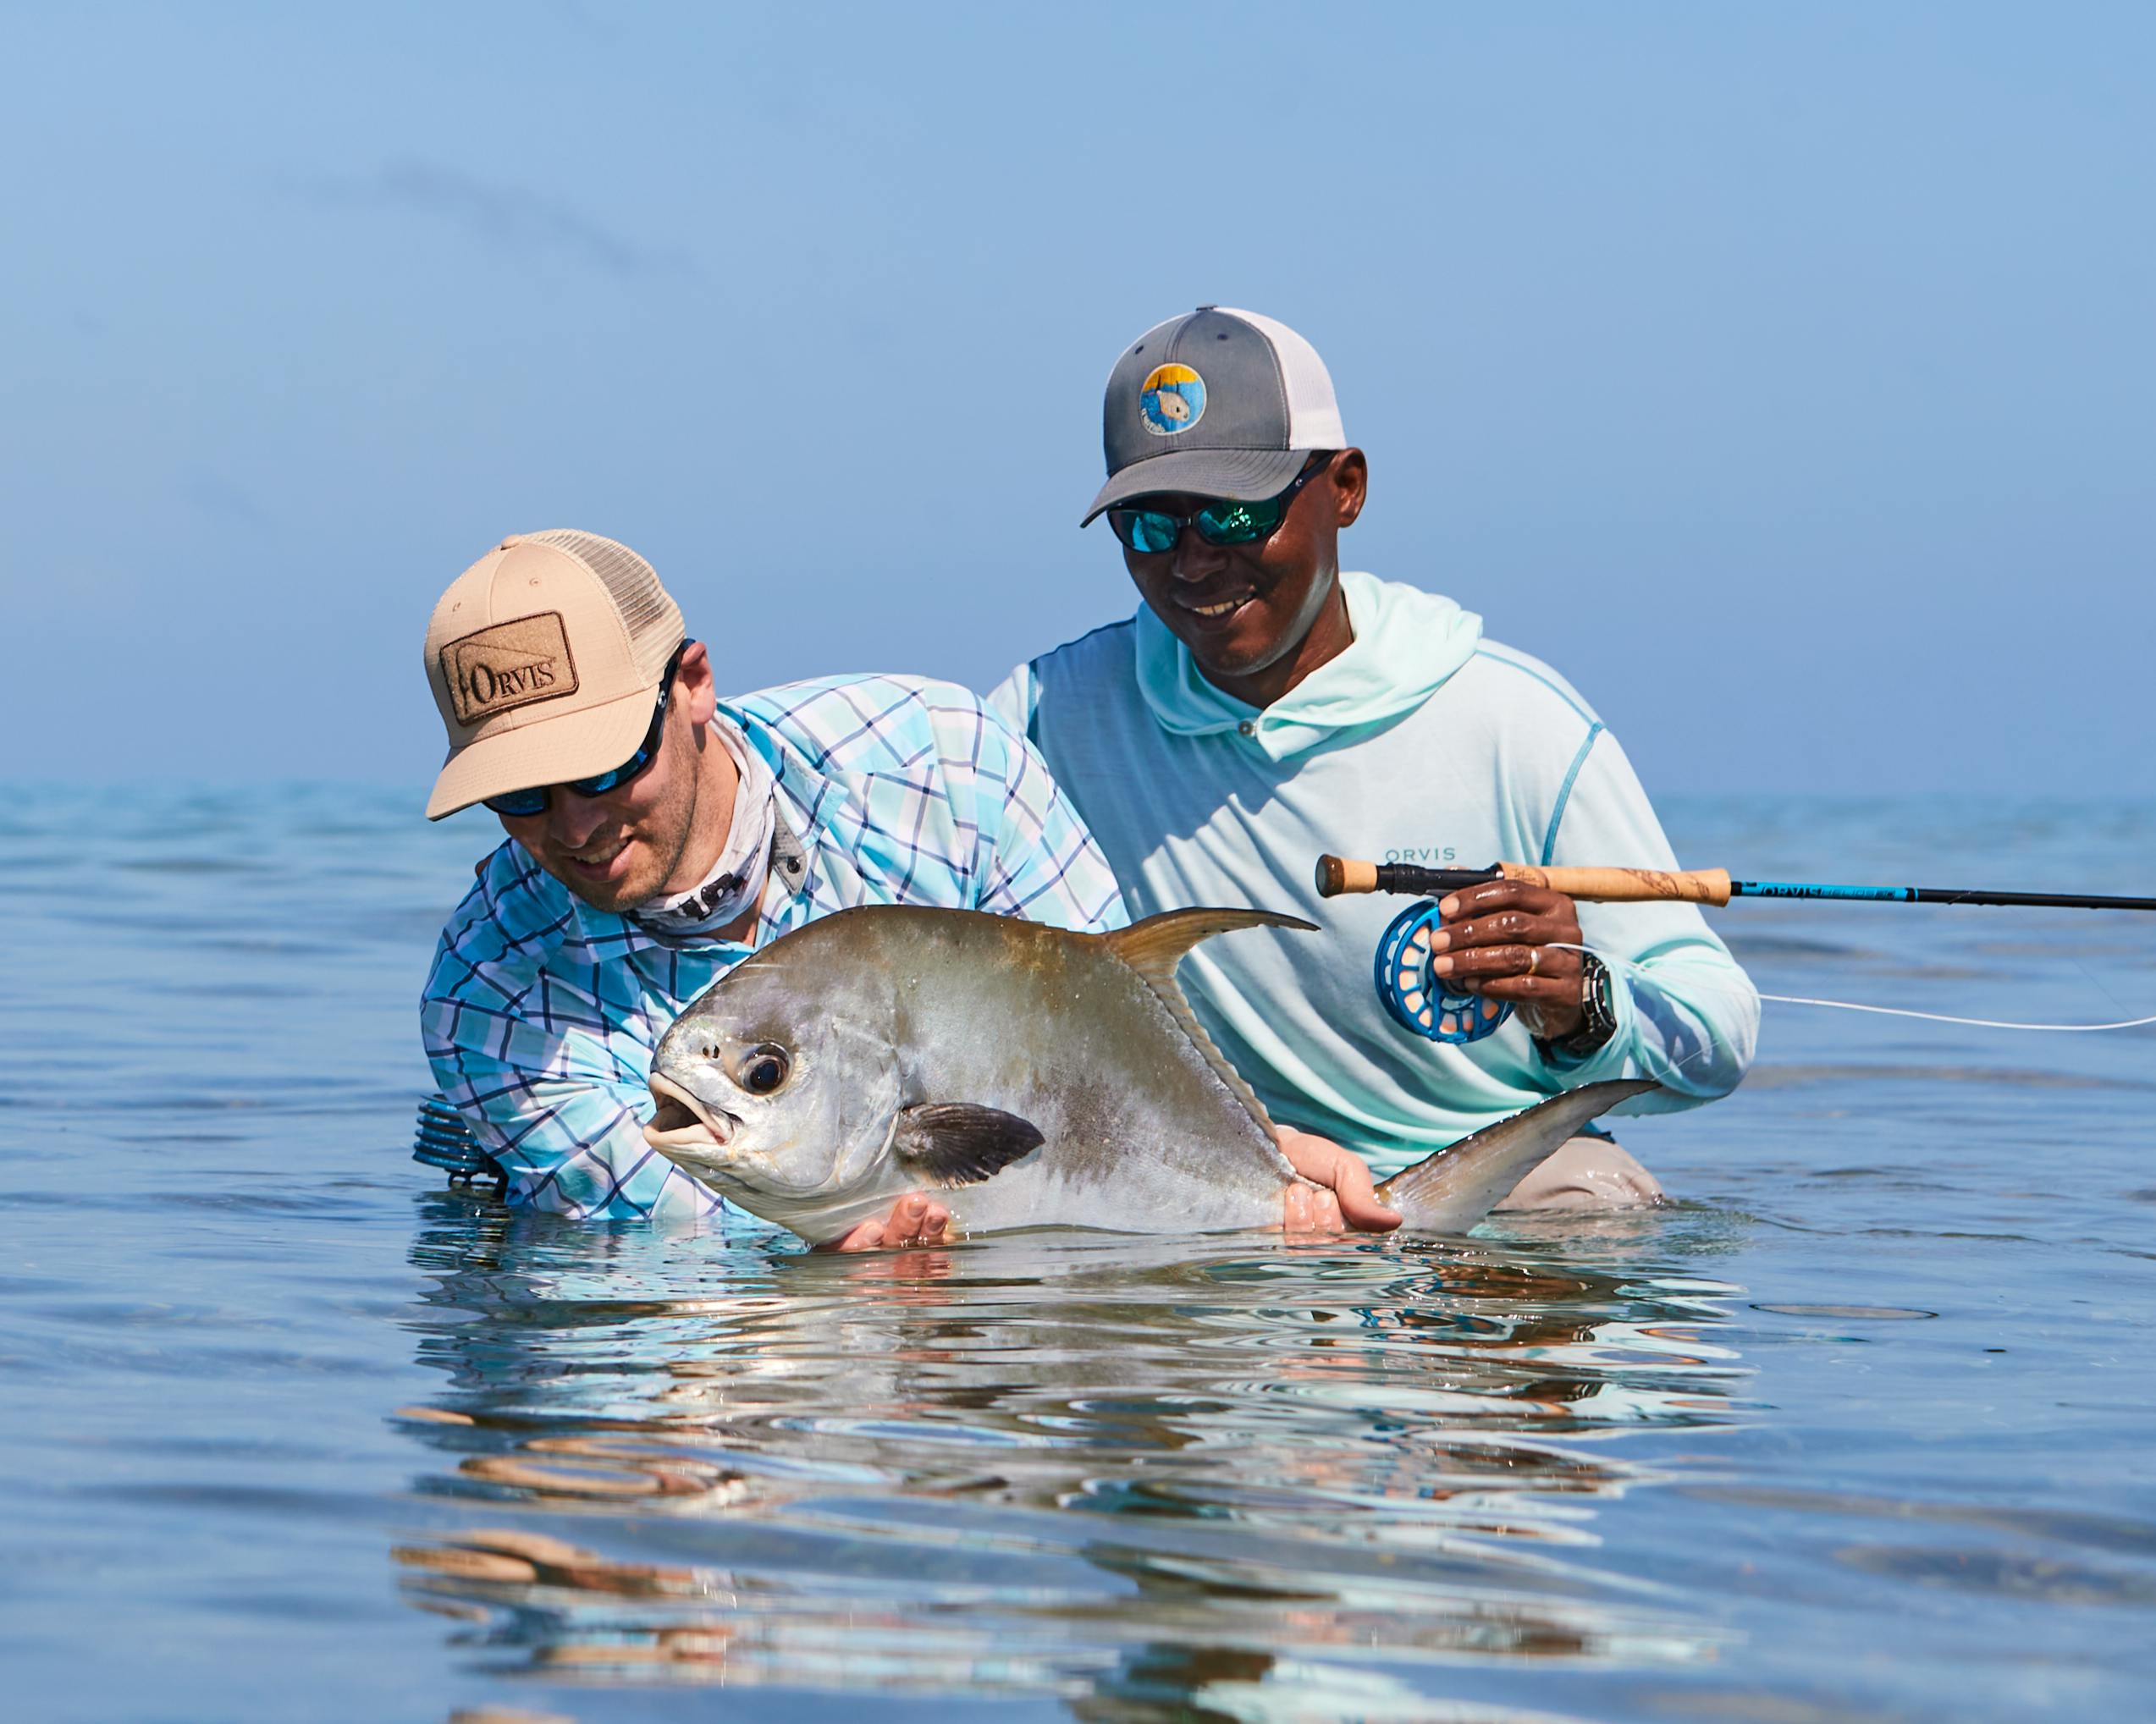 Orvis CEO Simon Perkins releases a permit in Punta Dorda, Belize while fishing with legendary guide Scully Garbutt.